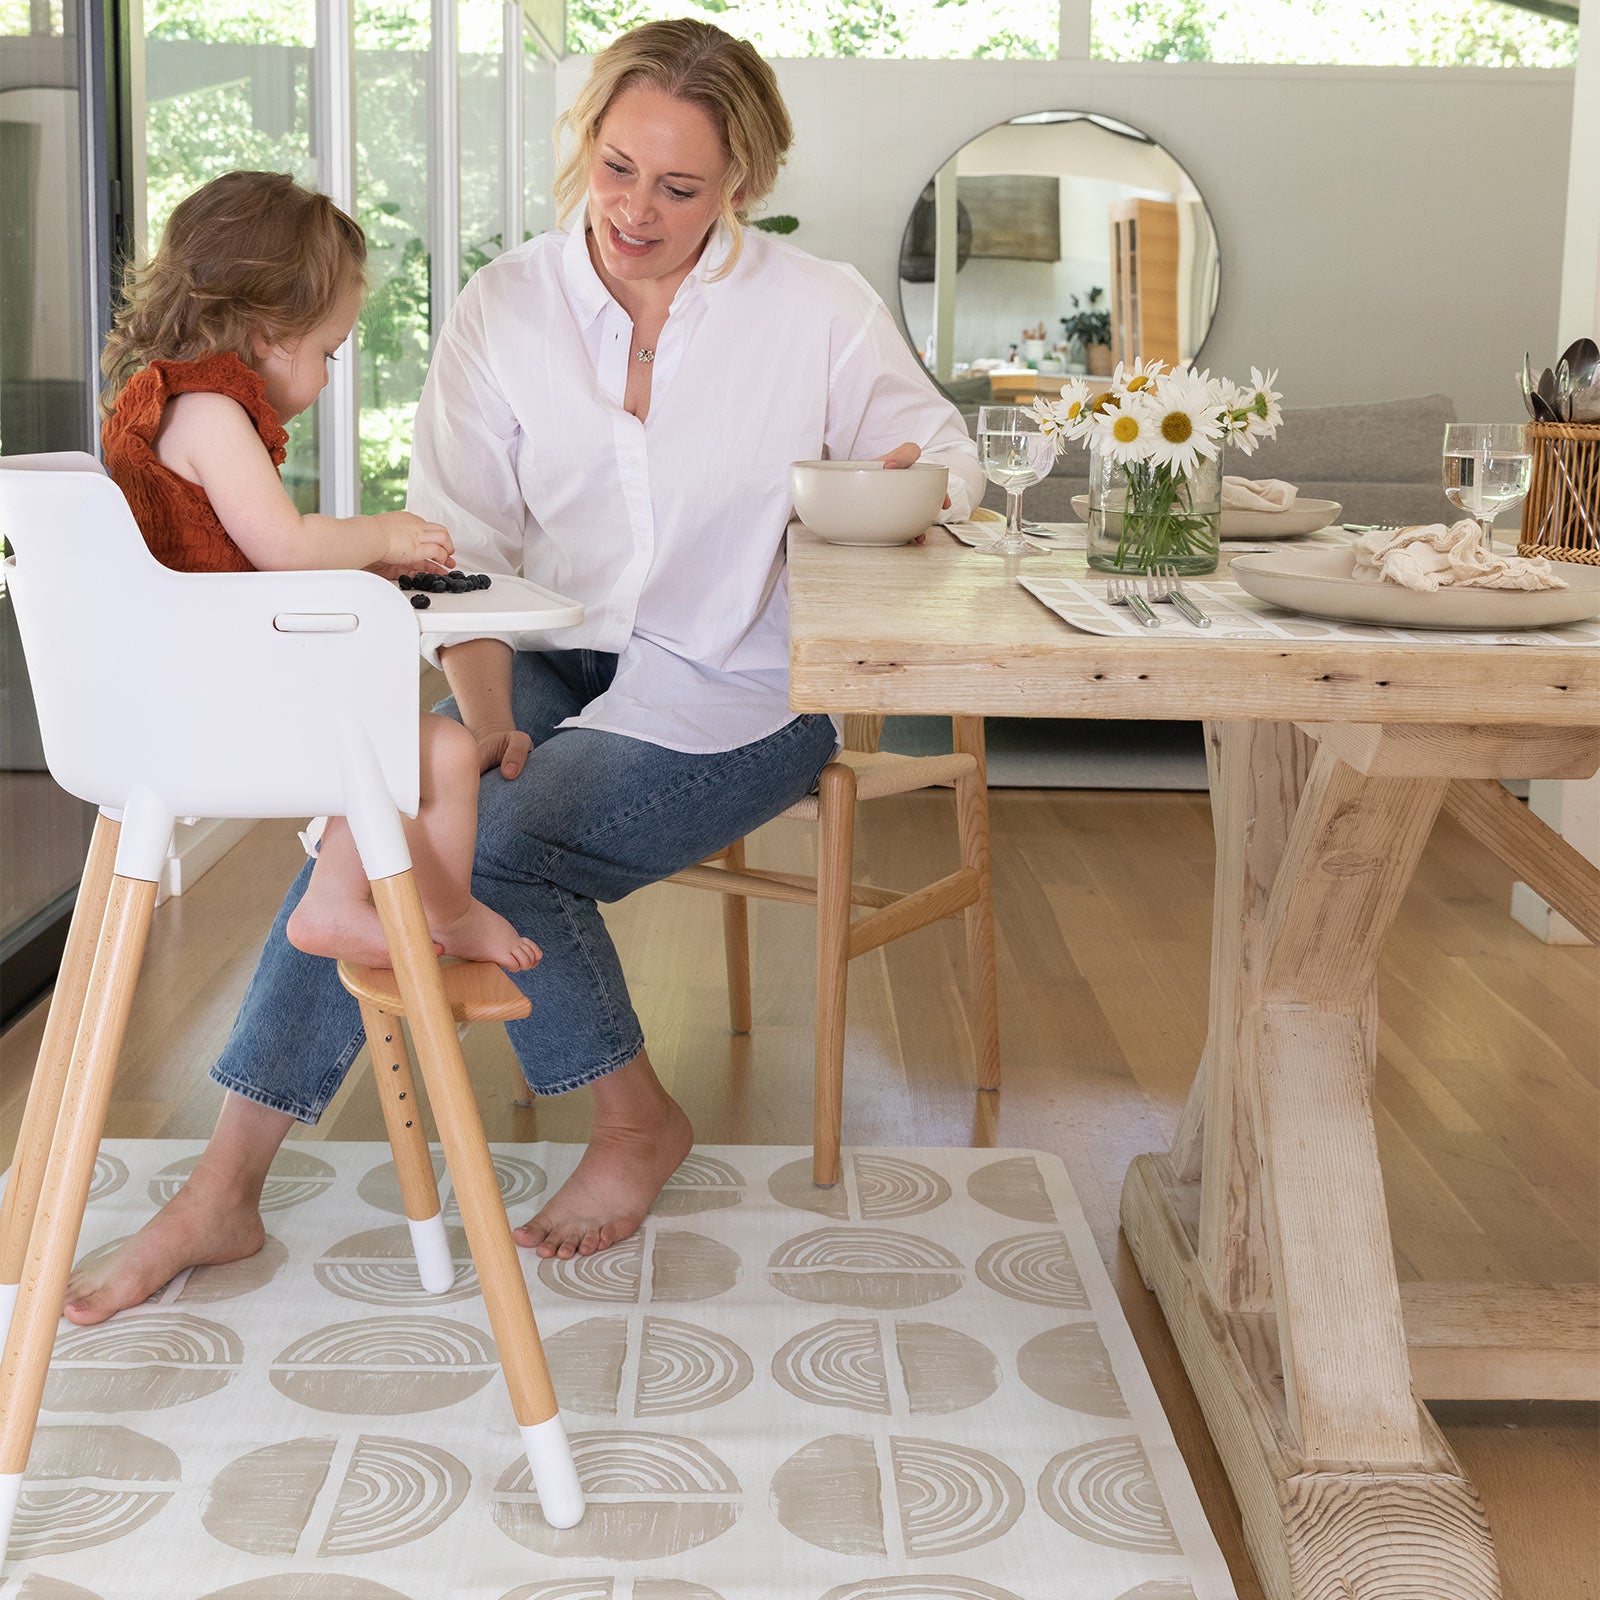 Ada modern minimalist baby high chair mat in Pebble taupe and off white. Shown at kitchen table with Mom feeding baby in high chair.